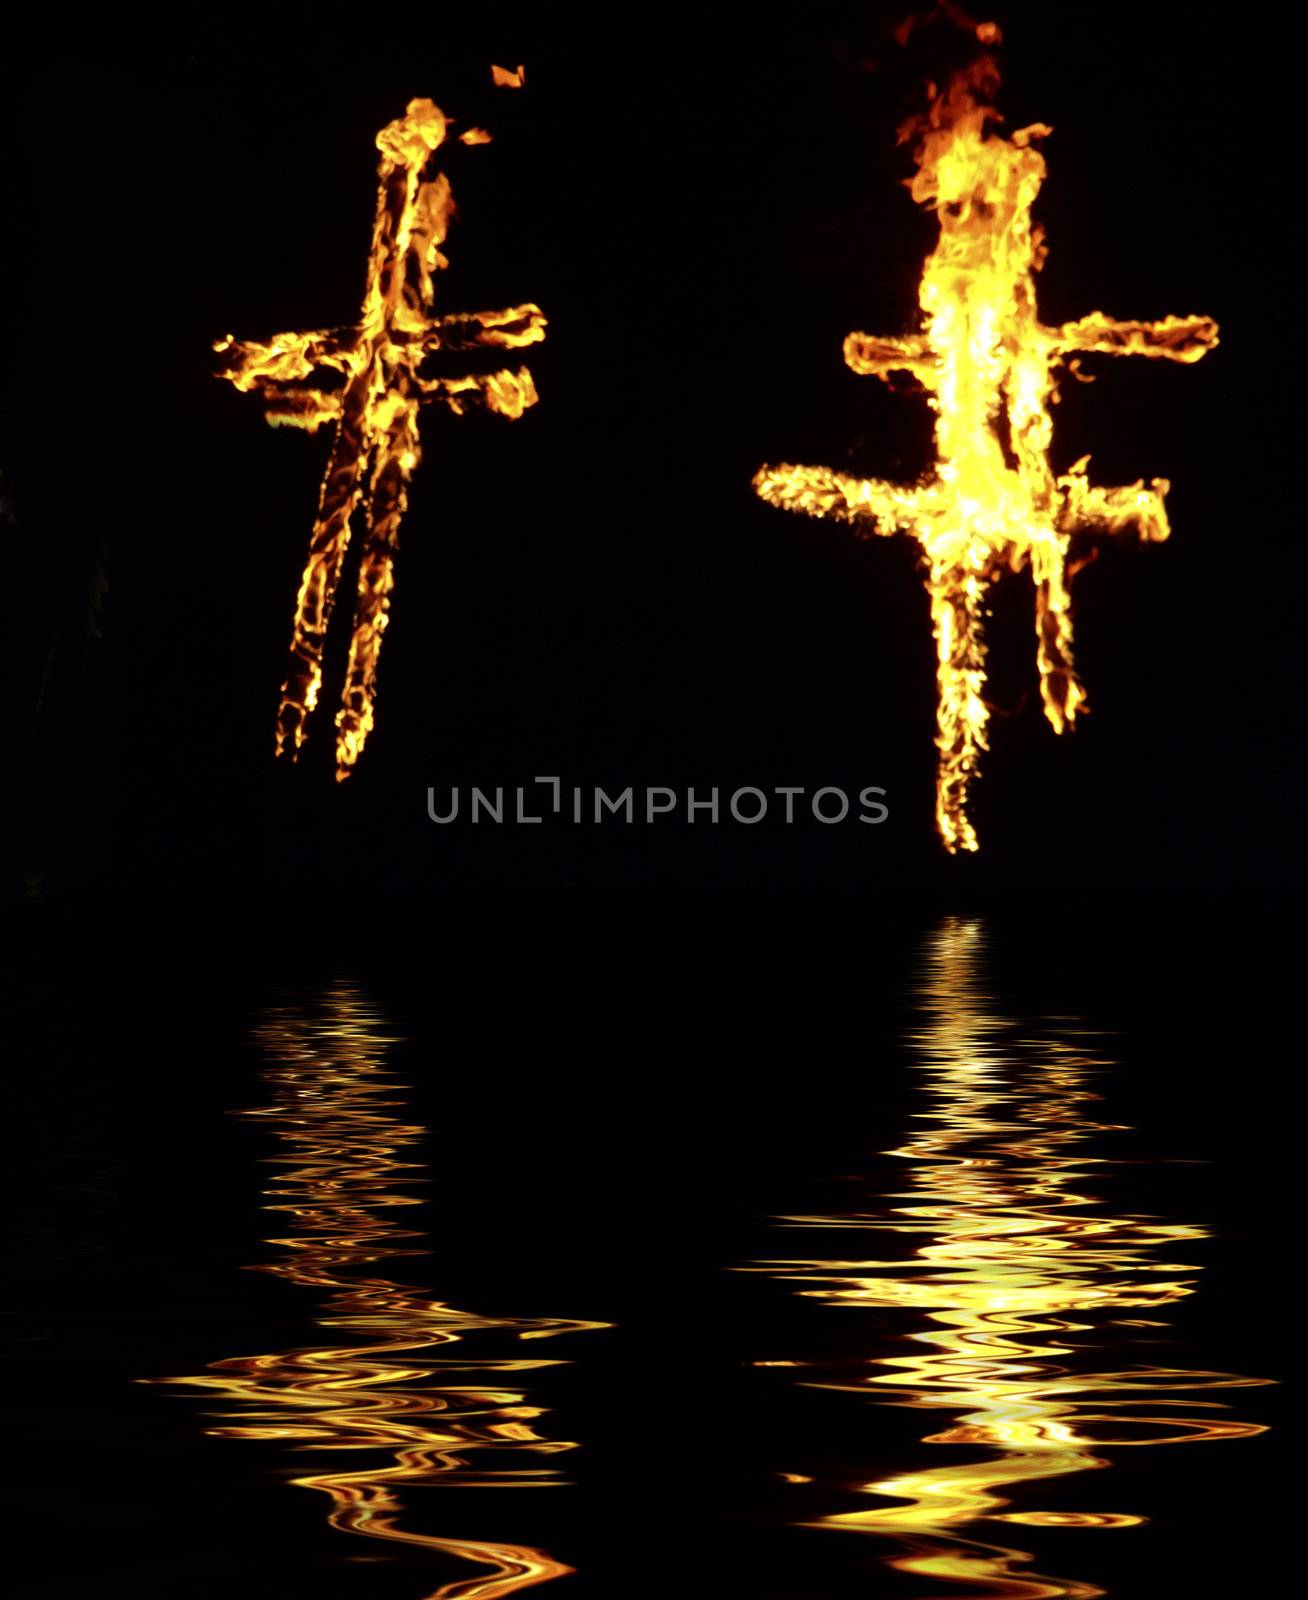 Burning crosses being used as part of ritual, on black background